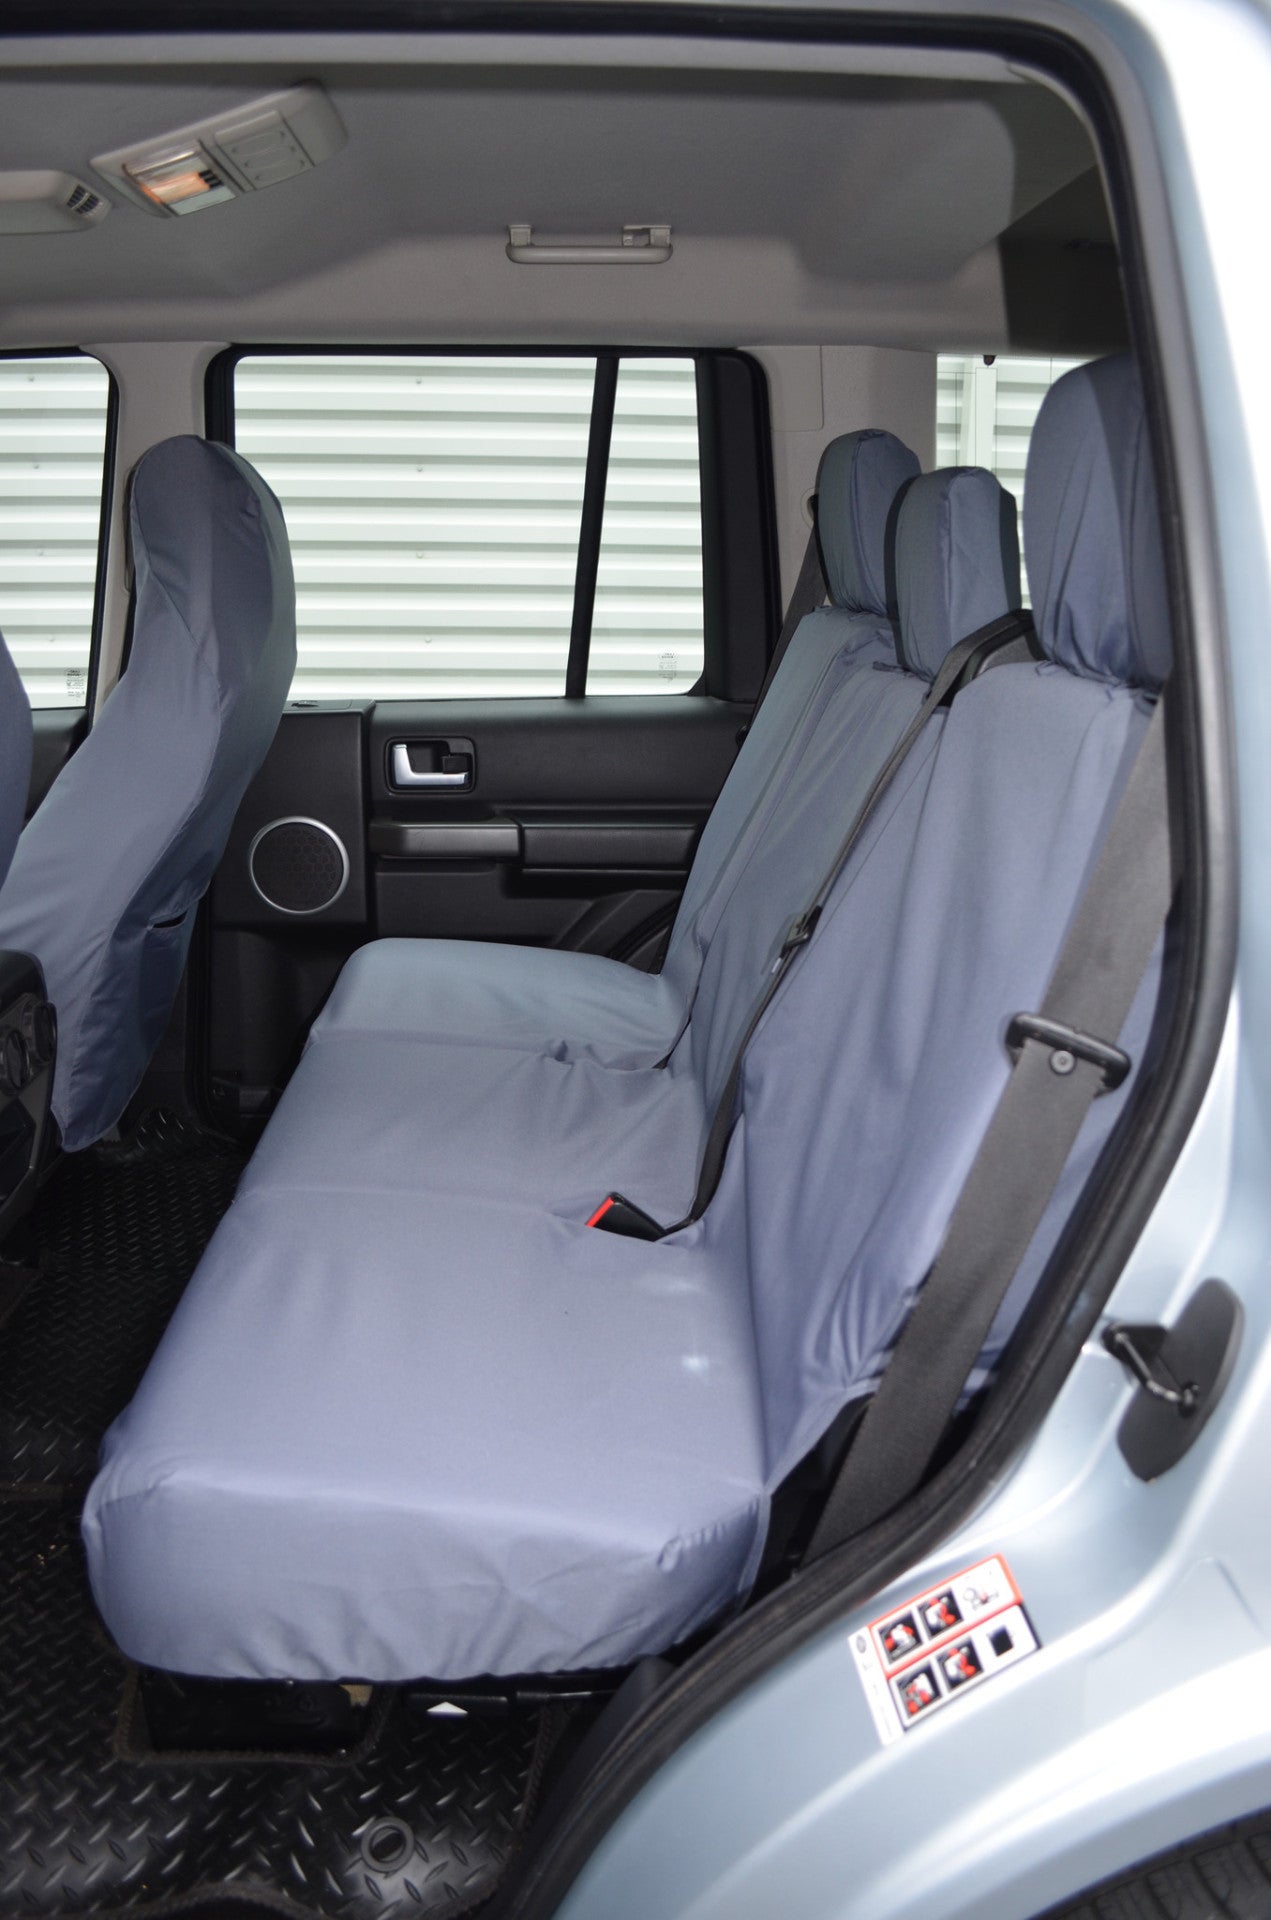 Land Rover Discovery 3 &amp; 4 (2004-2017) Seat Covers Rear 2nd Row (3 Singles) / Grey Turtle Covers Ltd